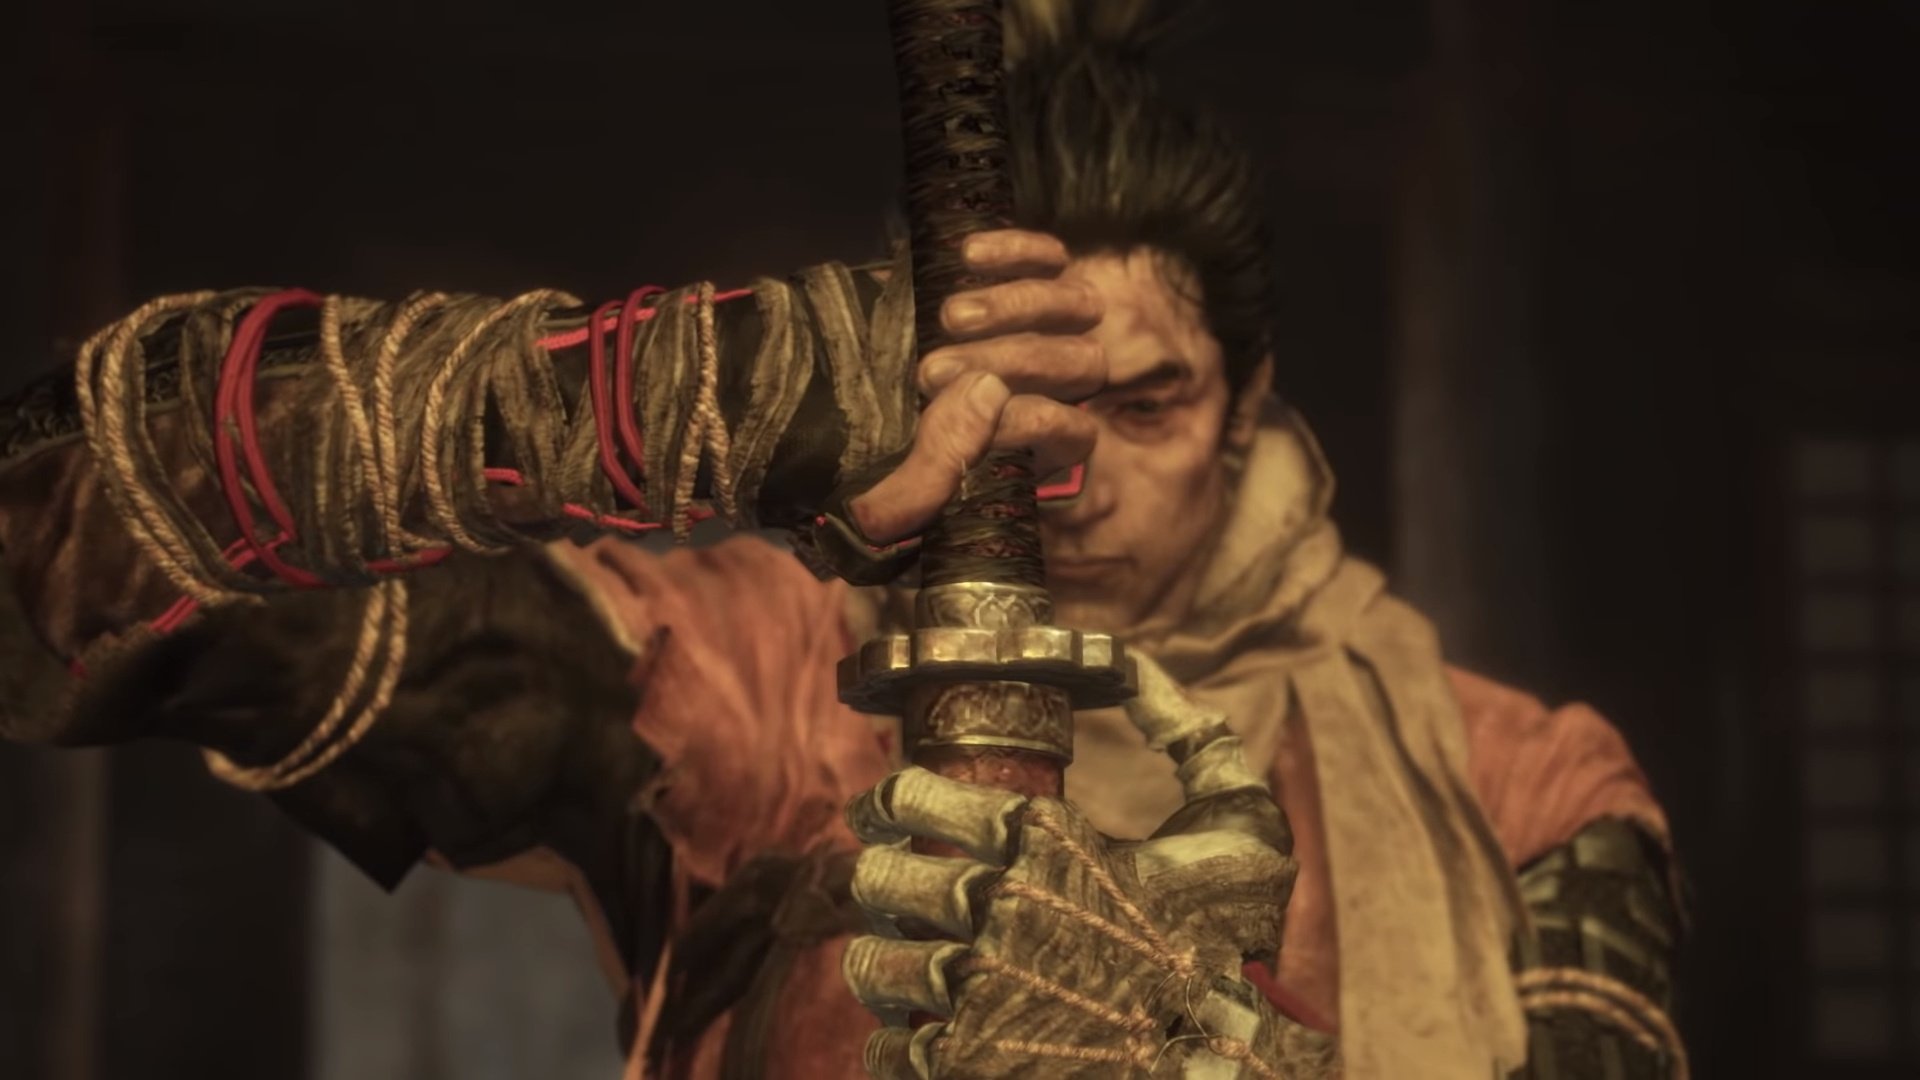 Sekiro Shadows Die Twice How To Kill Emma The Gentle Blade Boss Guide Ps4 Playstation 4.original 